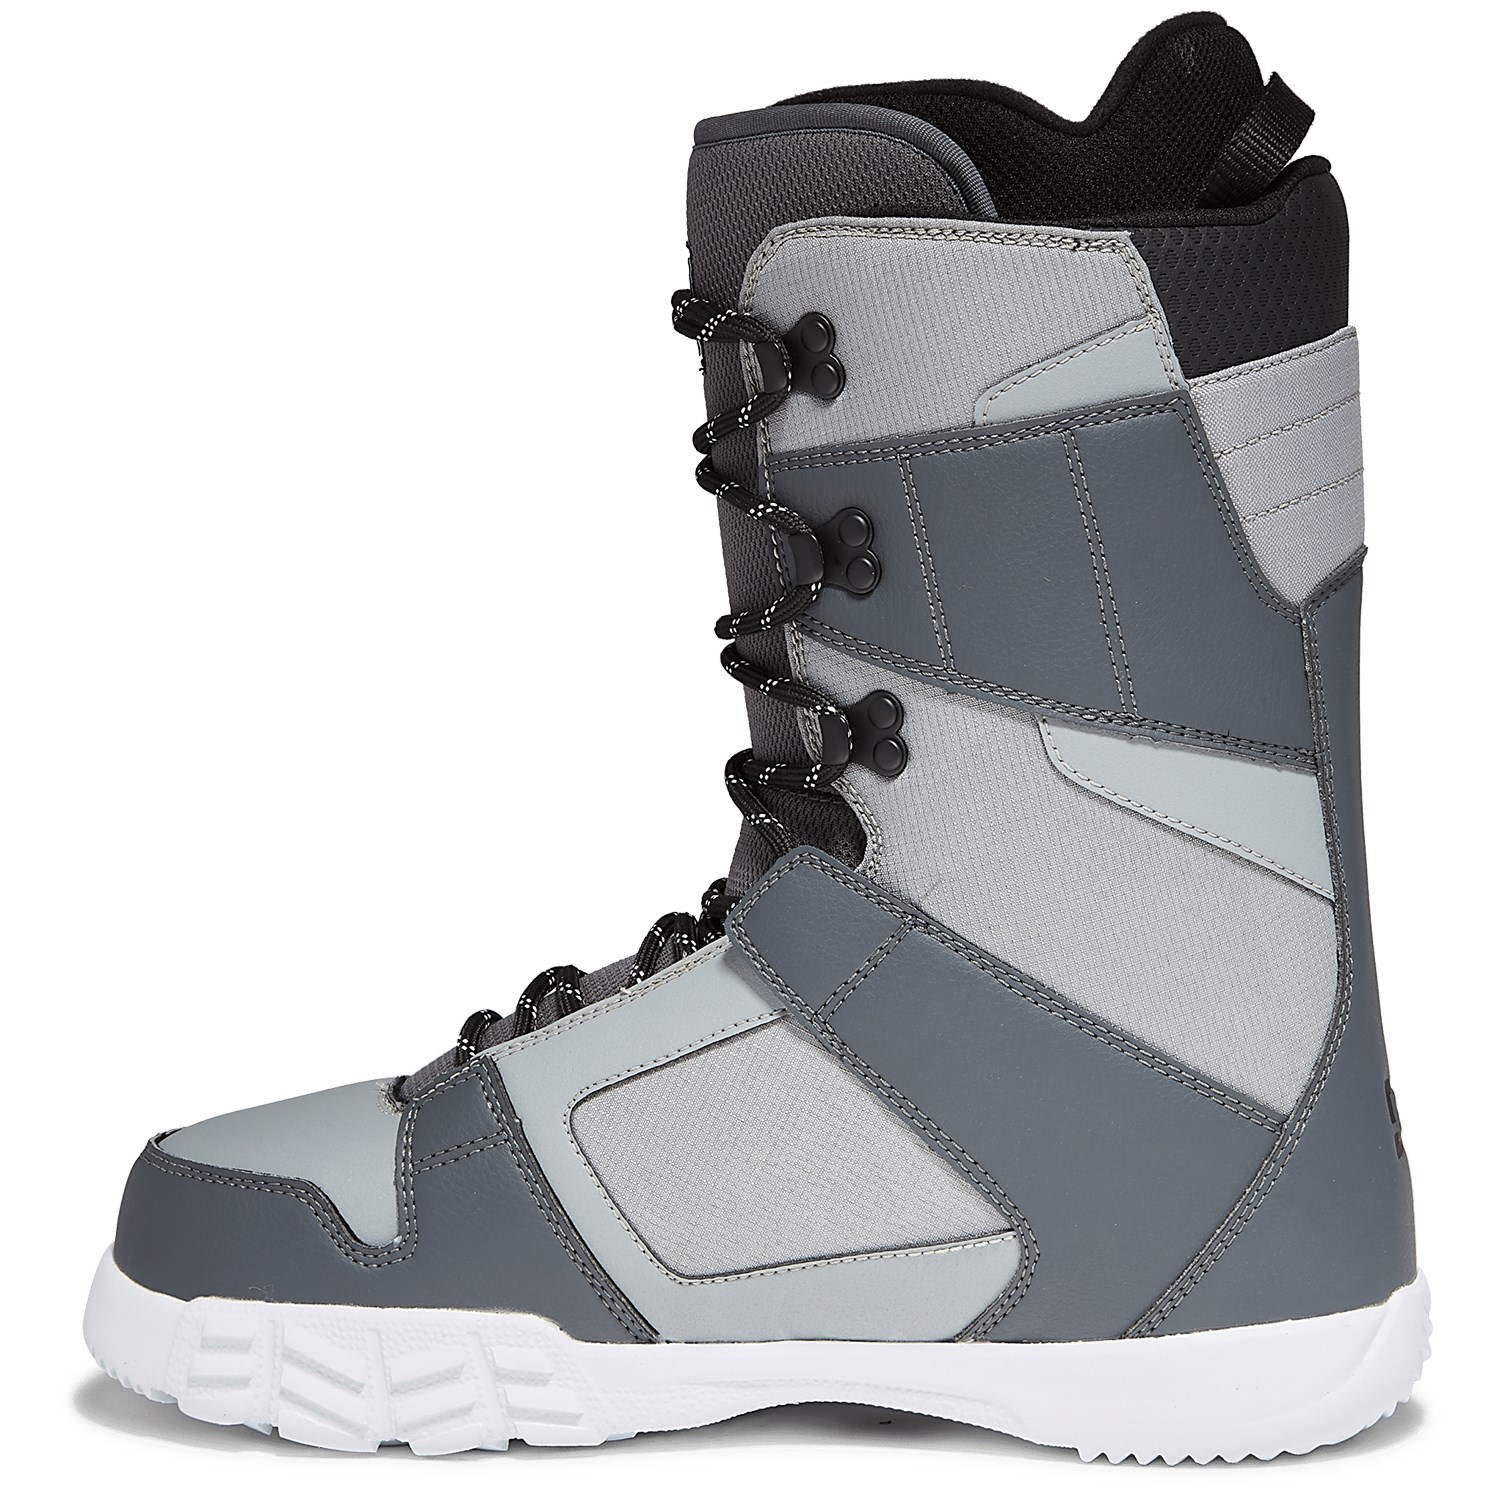 DC Phase Snowboard Boots Mens